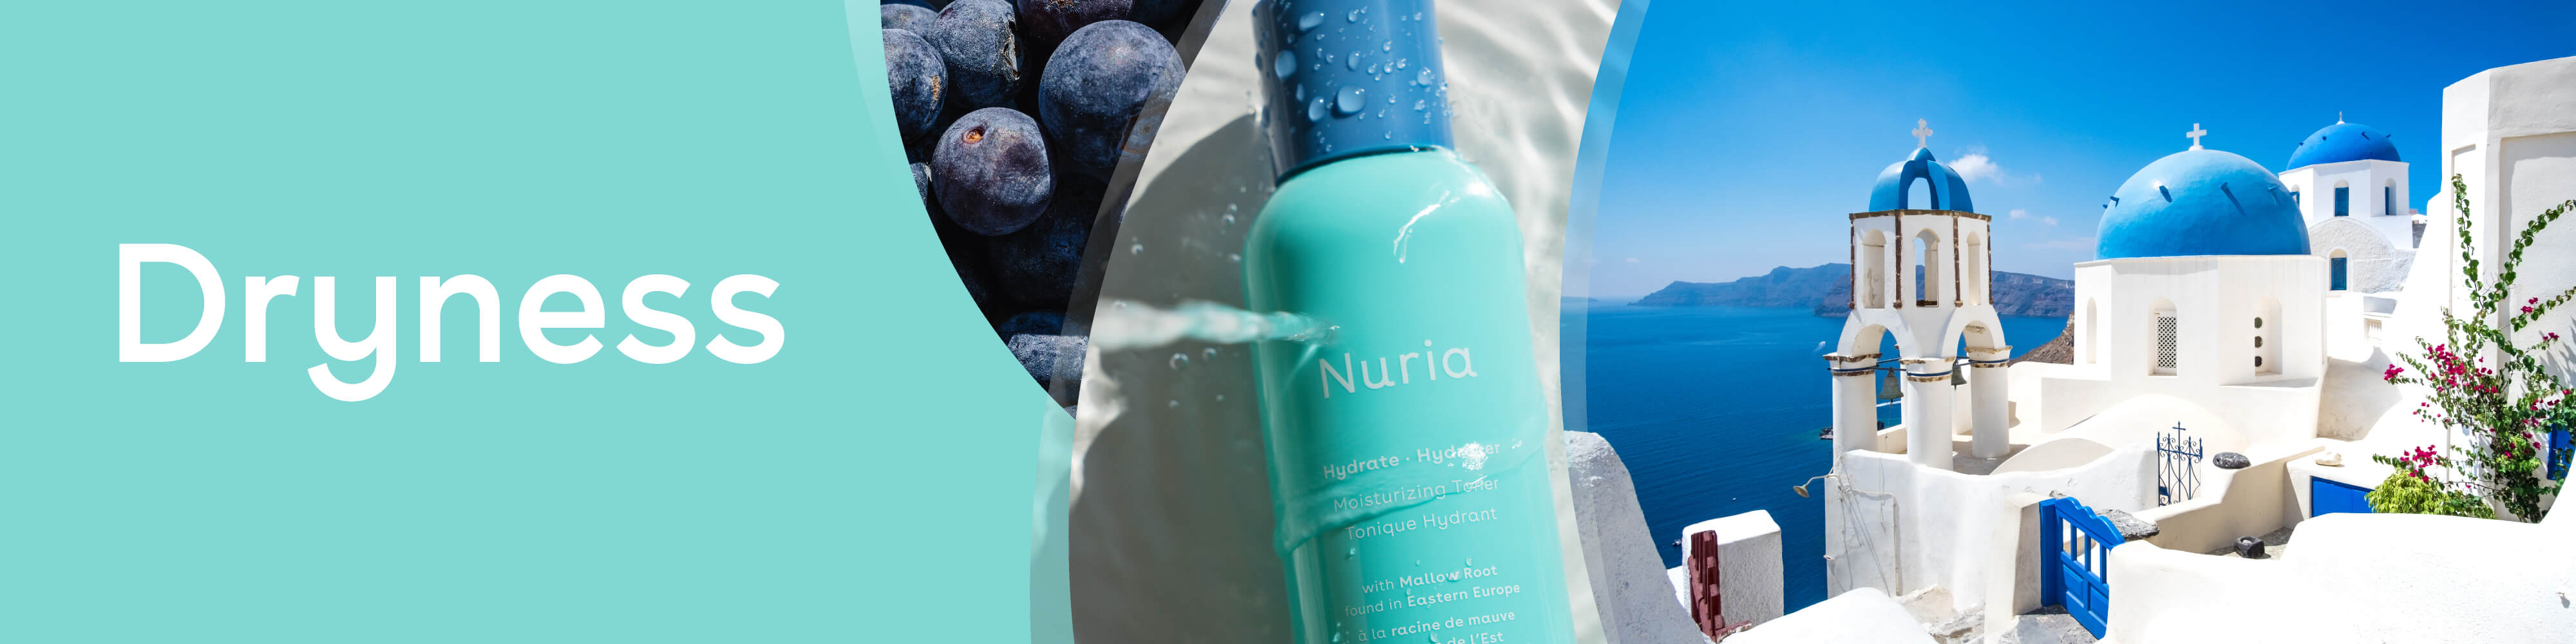 Dryness - Nuria's products for your skin concerns